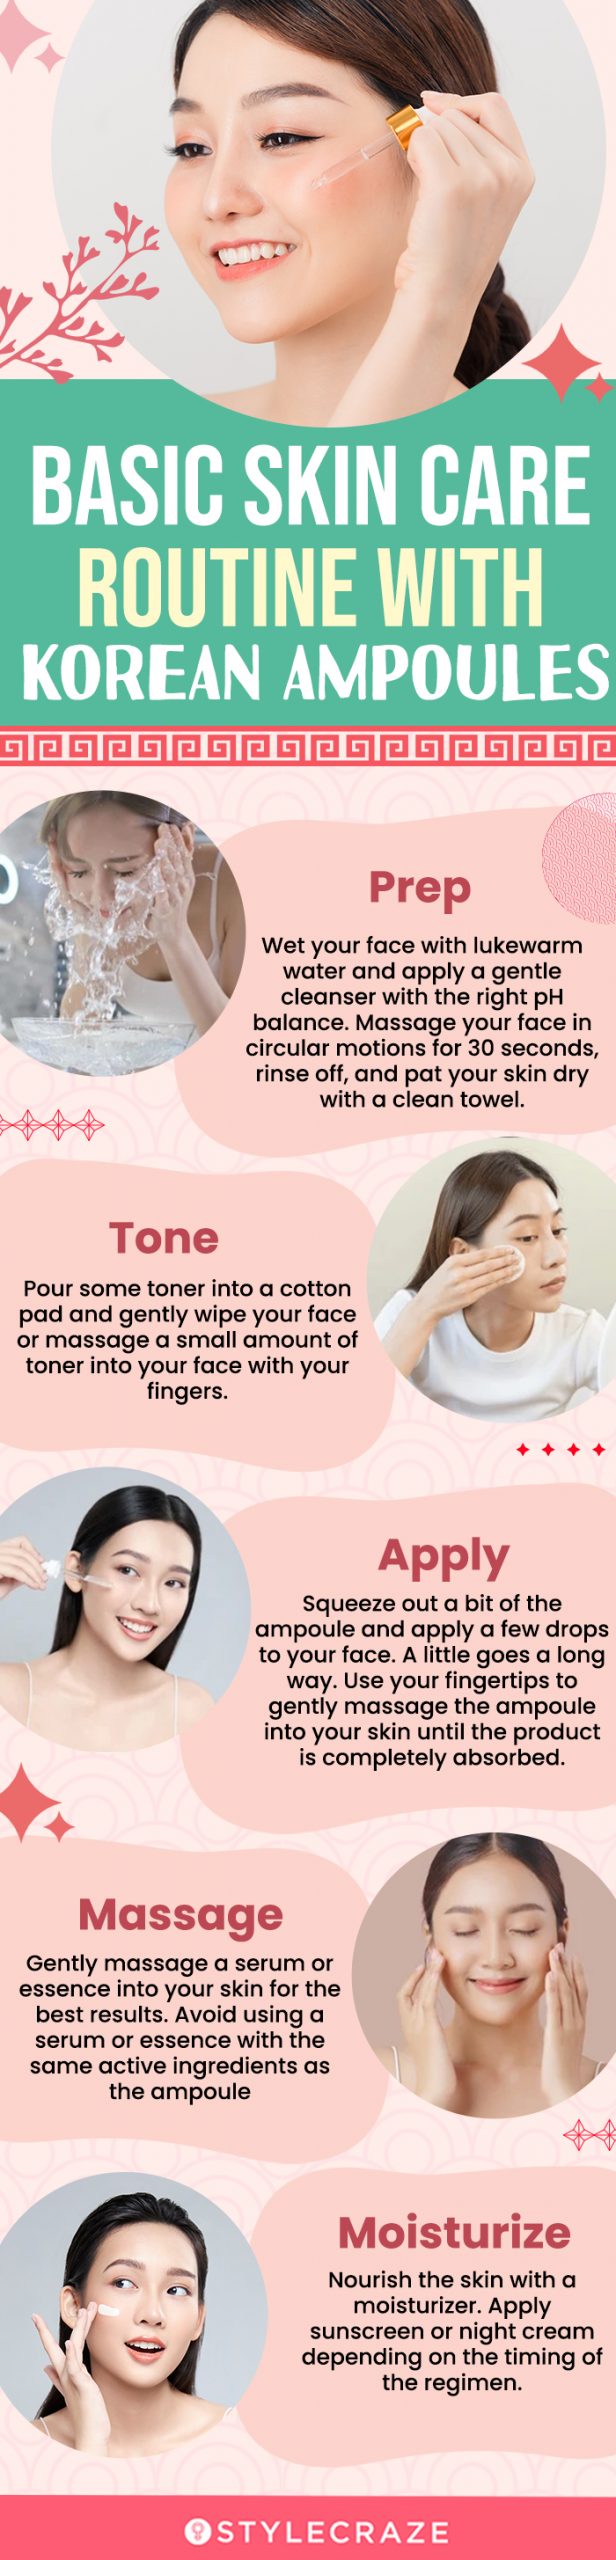 Benefits Of Gloves For People With Eczema (infographic)